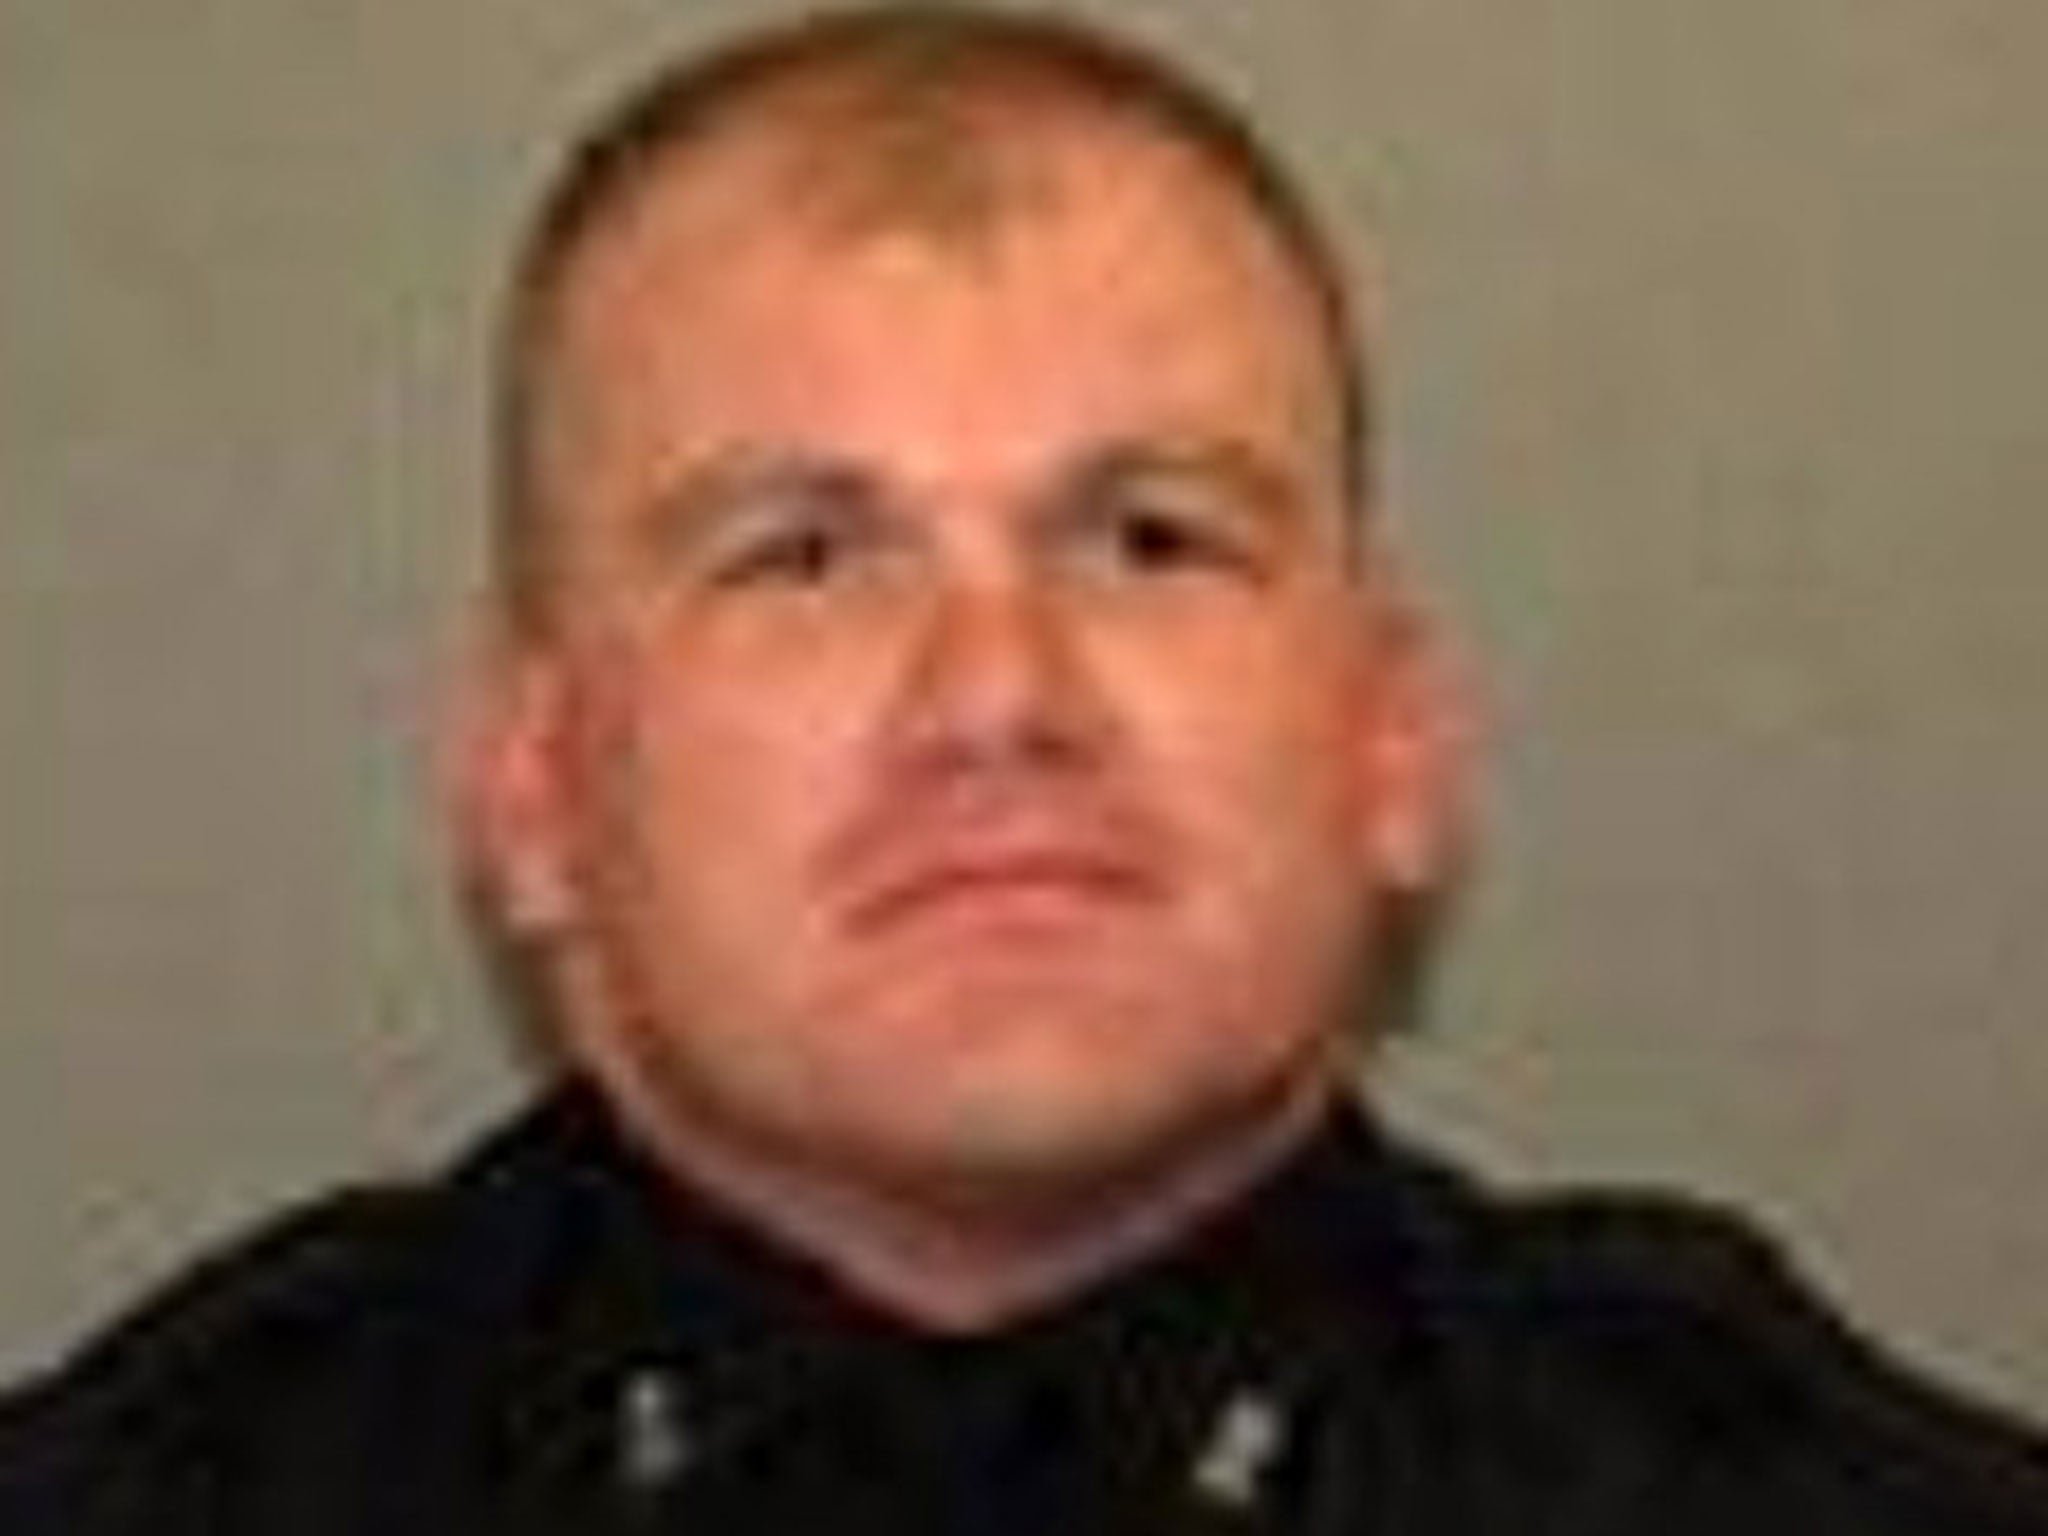 Photo released by the Memphis Police Department shows officer Sean Bolton, 33, who was fatally shot during a traffic stop on 1 August 2015, in Memphis, Tennessee